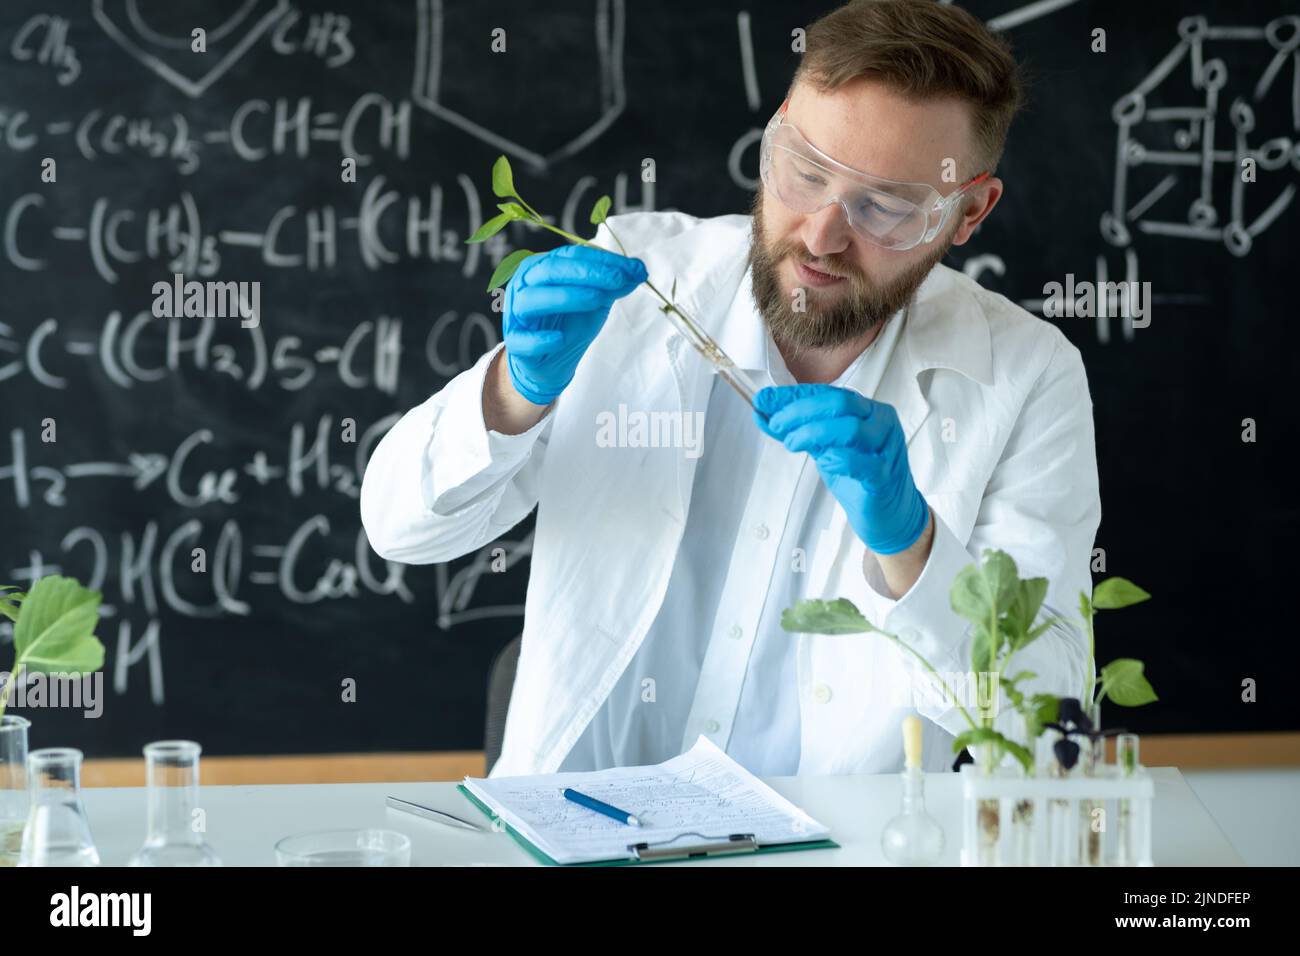 Biologist conducts experiments experimenting with plant breeding by synthesising compounds, with use of a test tube in a modern Laboratory Stock Photo